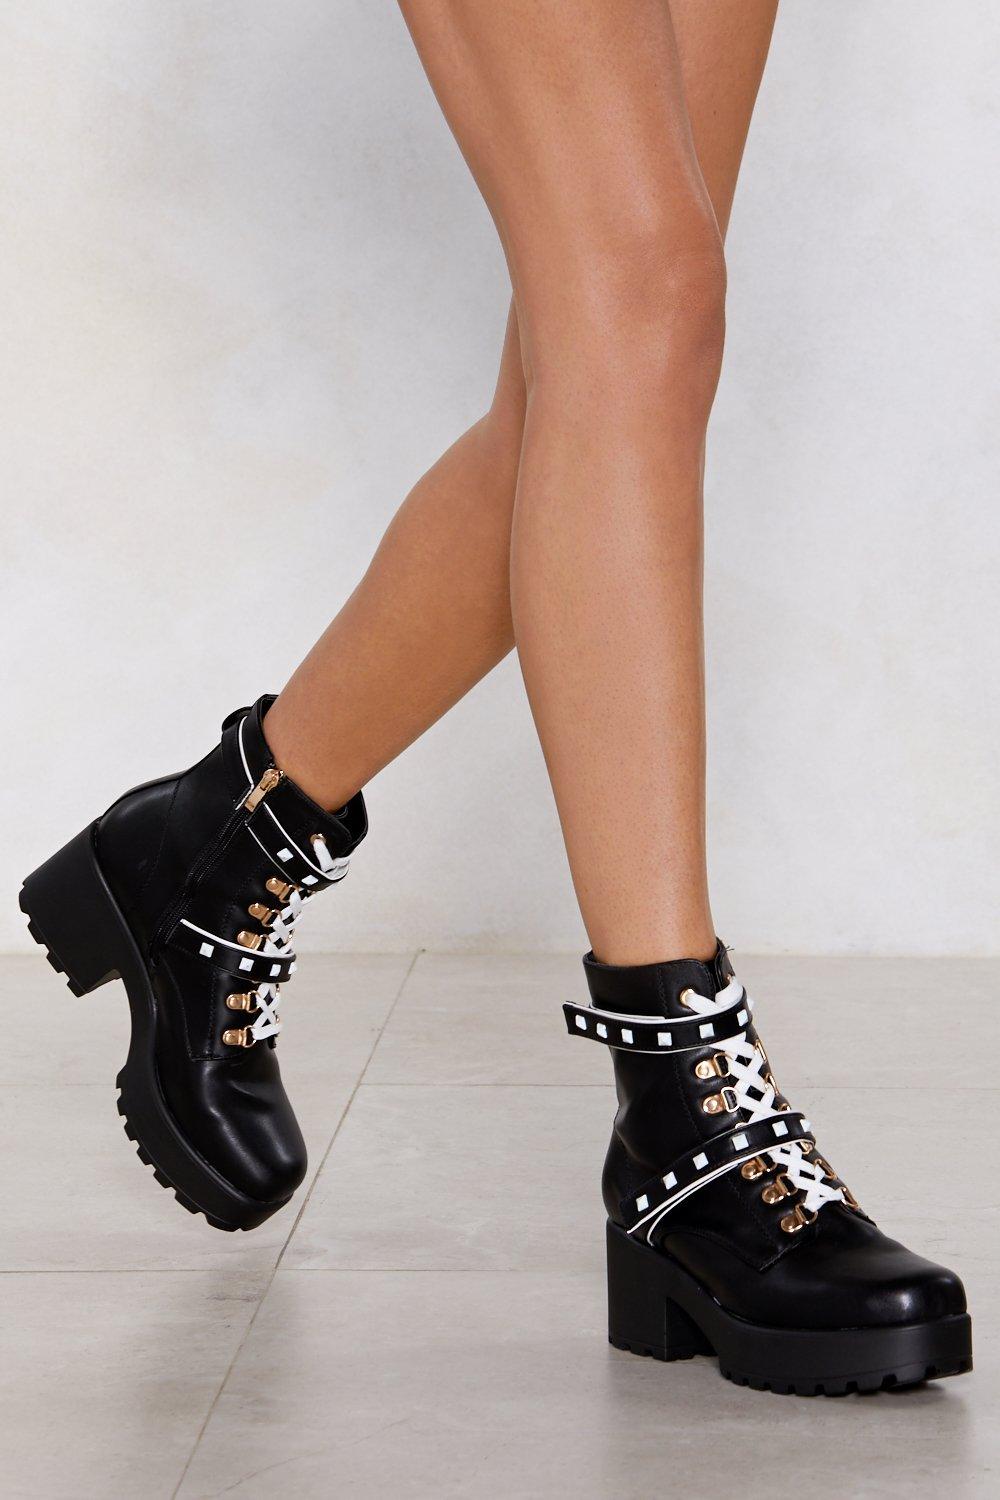 Junk In The Trunk Chunky Boot Nasty Gal